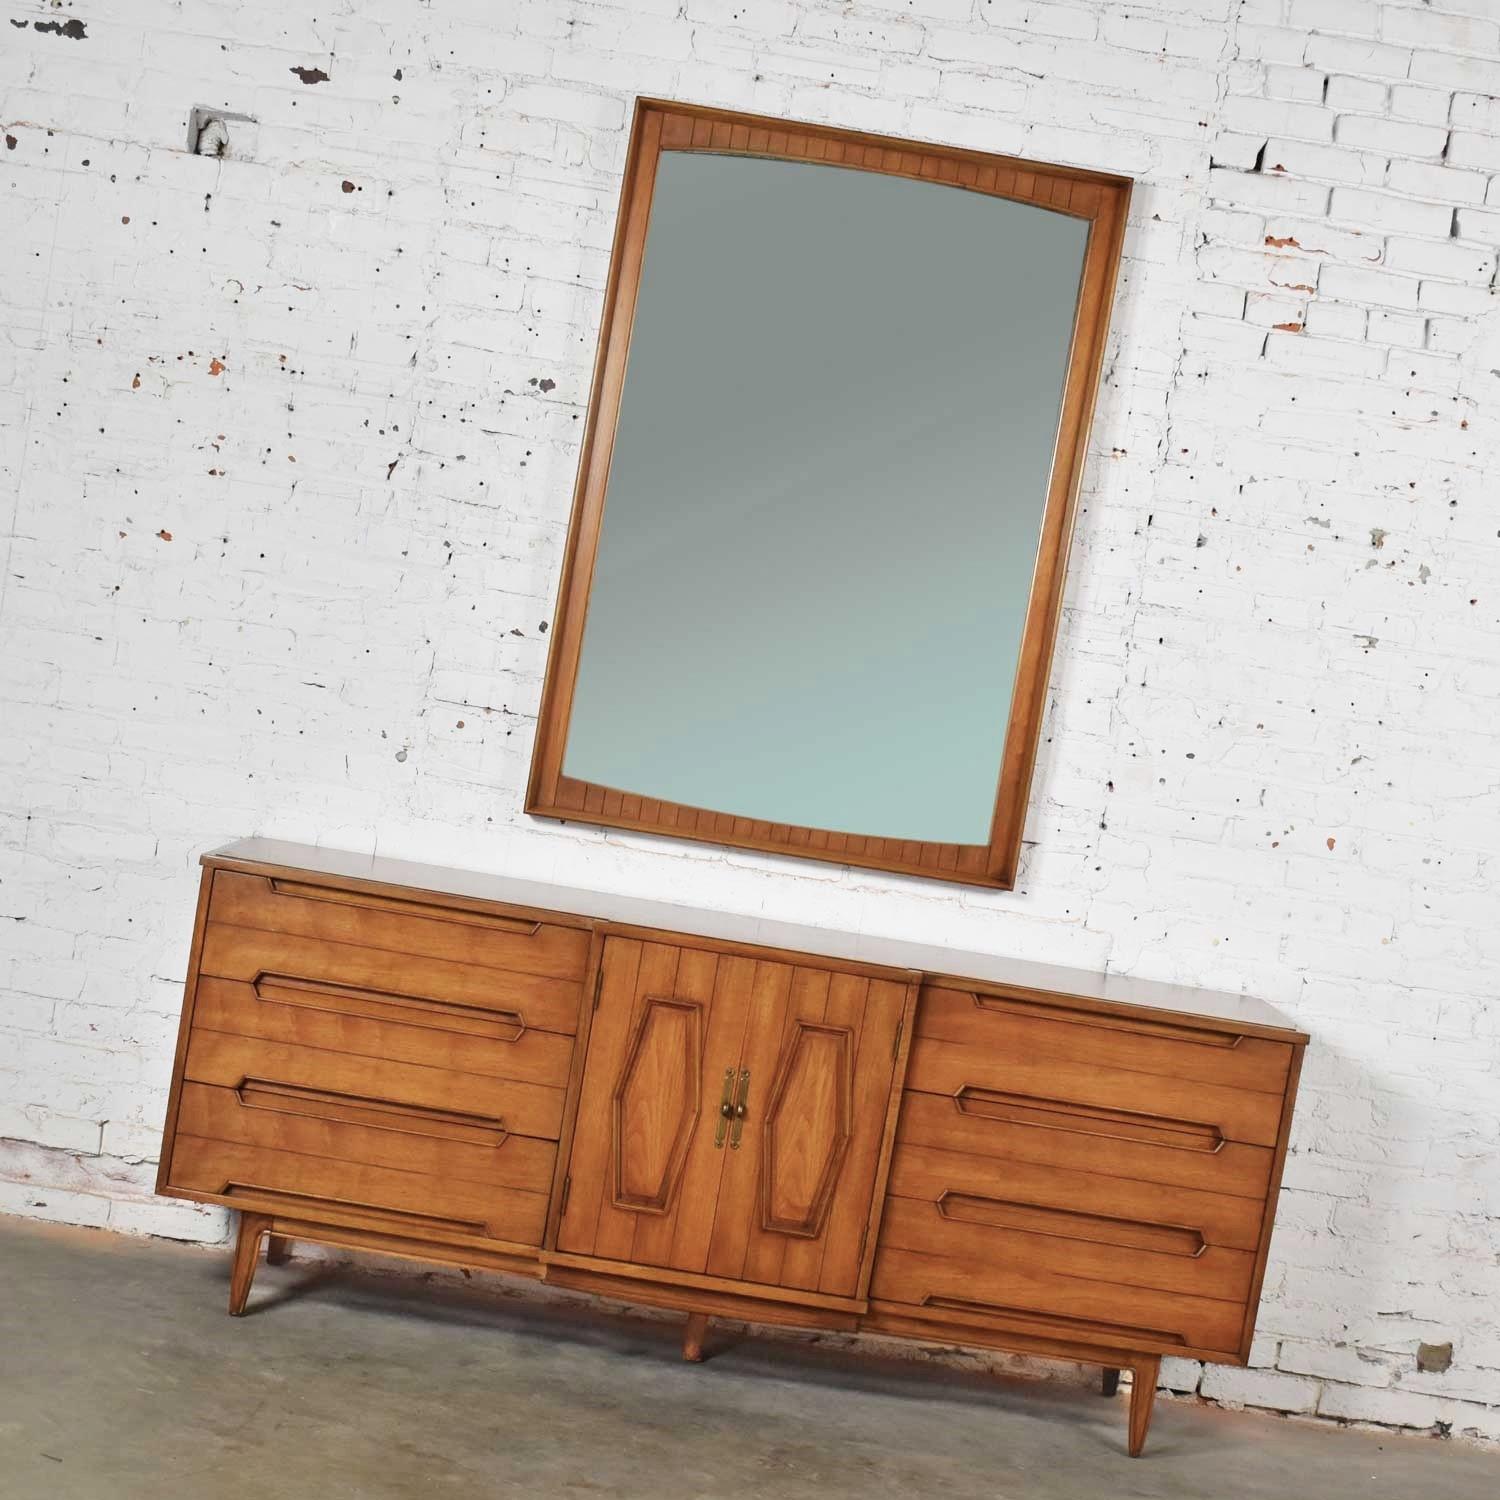 Handsome midcentury credenza or dresser with a large mirror. It is adorned with a hexagon paneled design and brass hardware. It is in wonderful vintage condition. This cabinet has been attributed to Thomasville Omega. The top has been refinished due